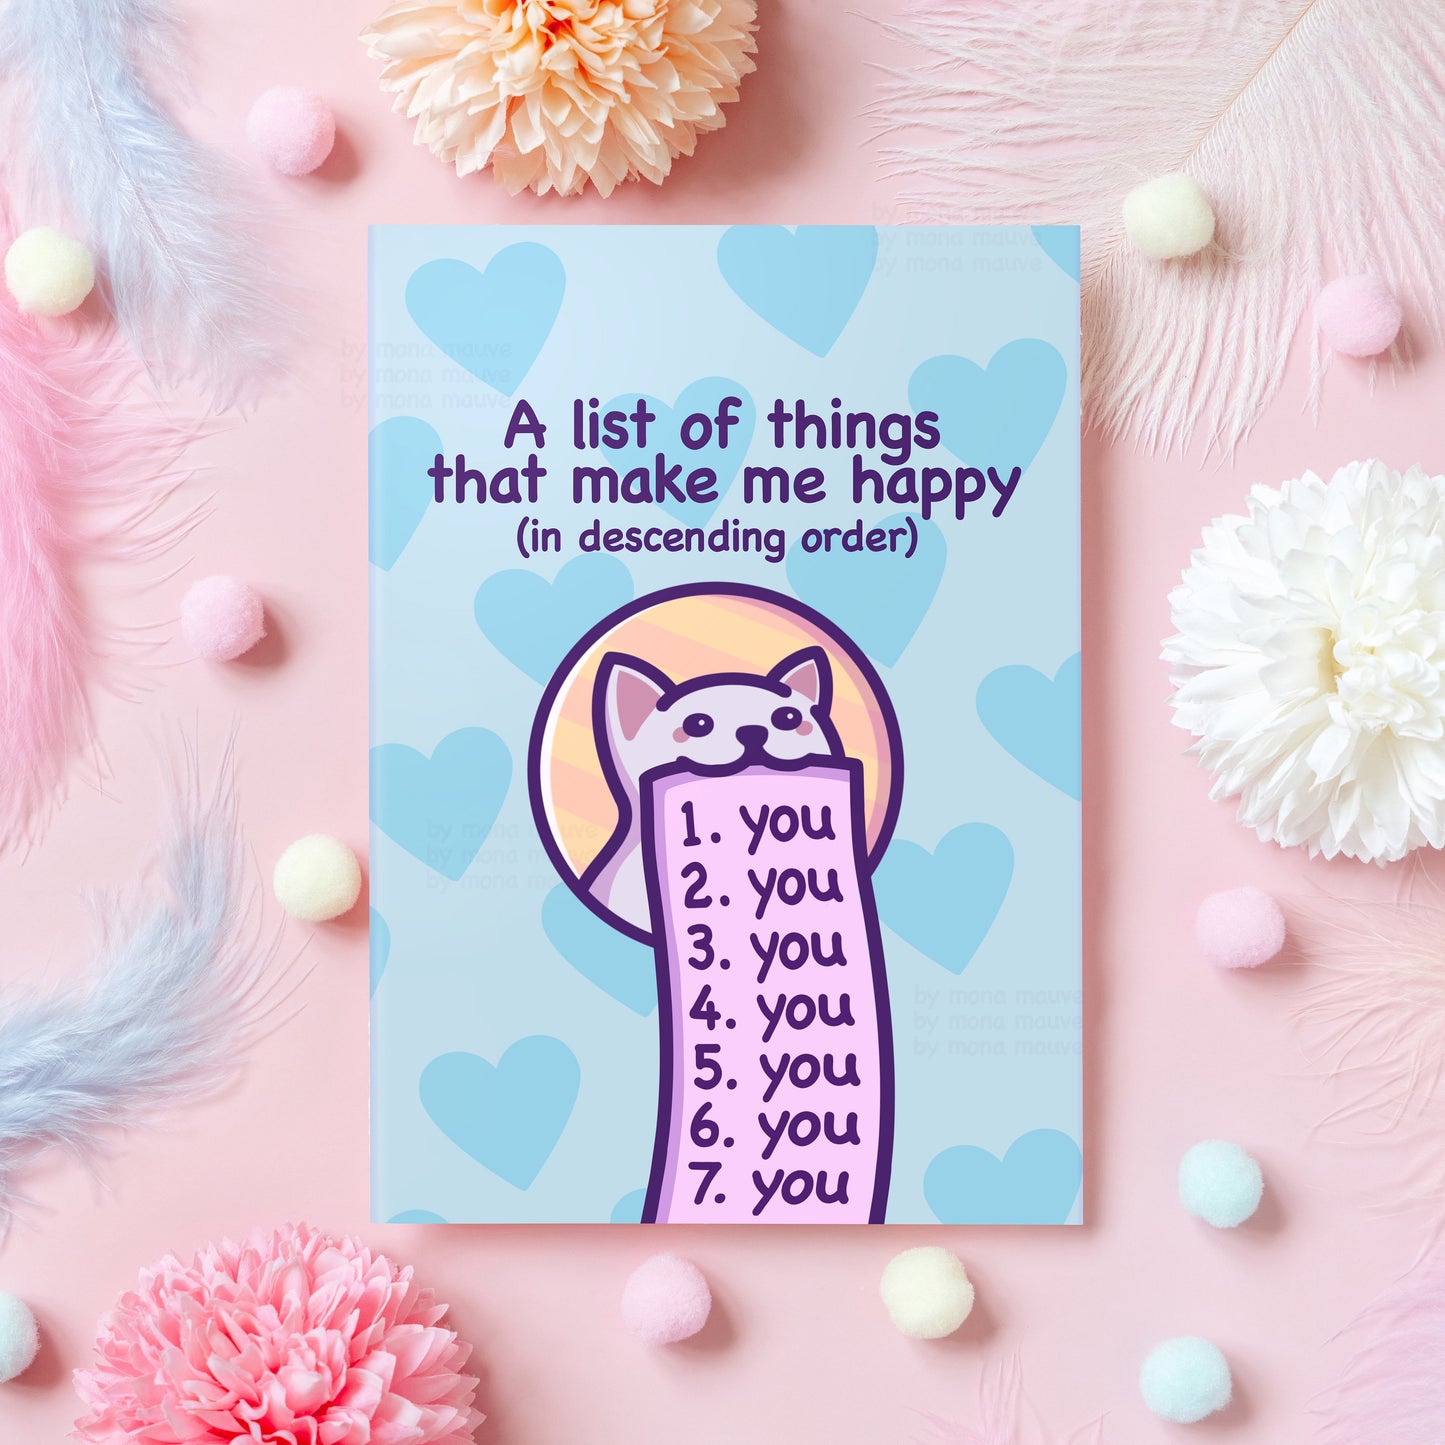 Wholesome Anniversary Card | A List of Things That Make Me Happy (You)! | Funny & Cheesy Cat Meme Greeting Card | Gift for Boyfriend, Girlfriend - Her or Him